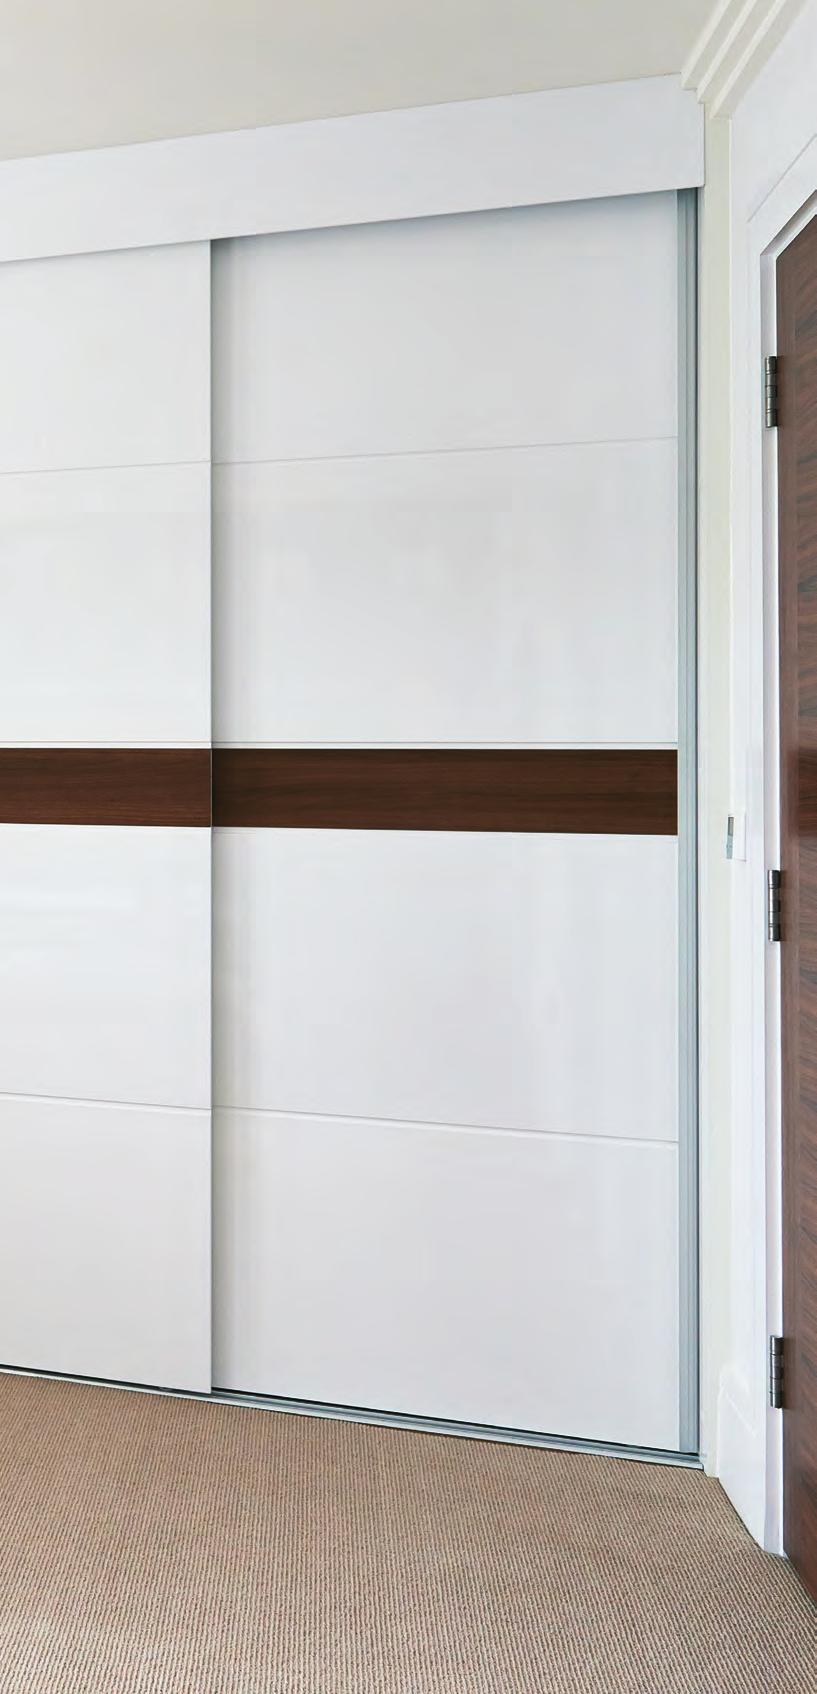 JERICHO SLIDING WARDROBE DOORS The Jericho frameless sliding door is an exciting and stylish statement for any bedroom.